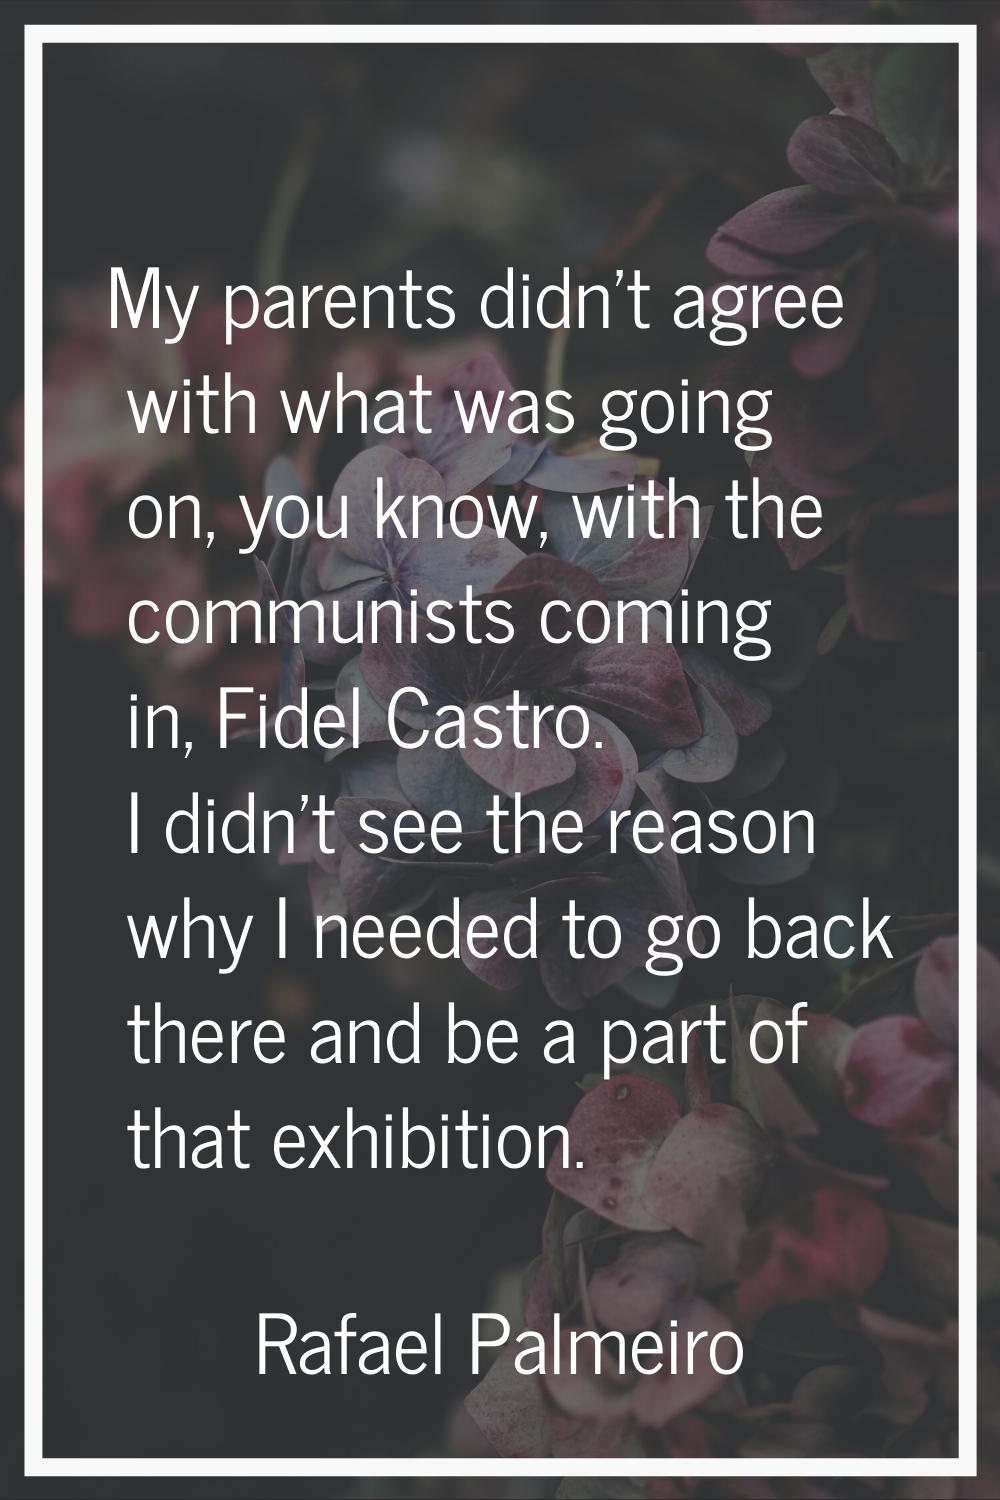 My parents didn't agree with what was going on, you know, with the communists coming in, Fidel Cast